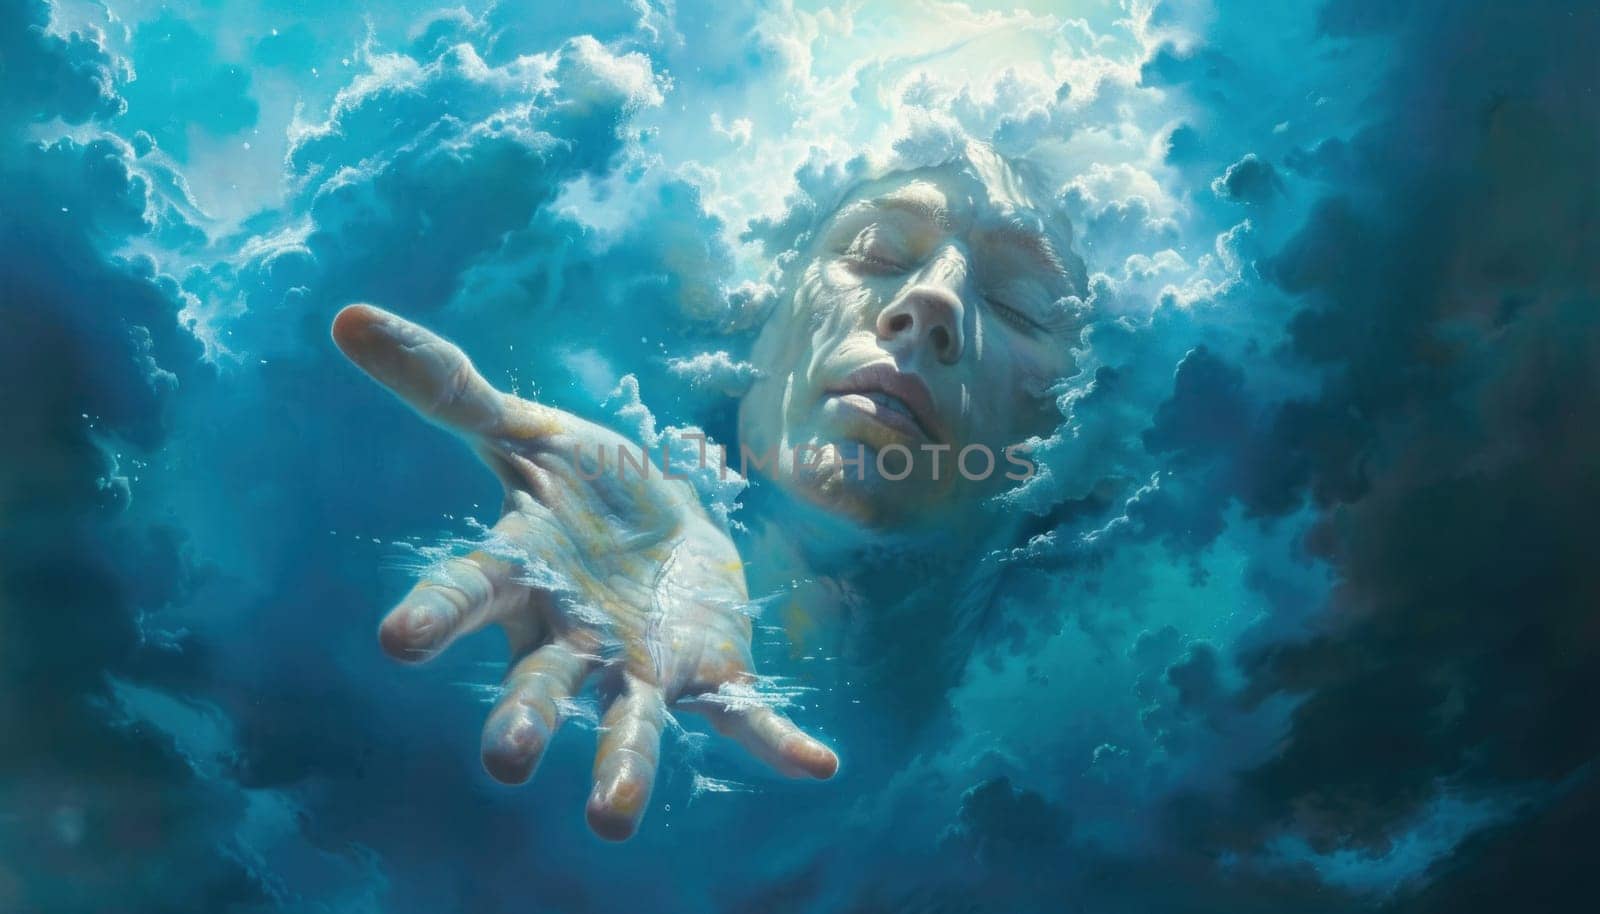 Man floating in the clouds reaching for the sky a surreal artistic representation of freedom and exploration